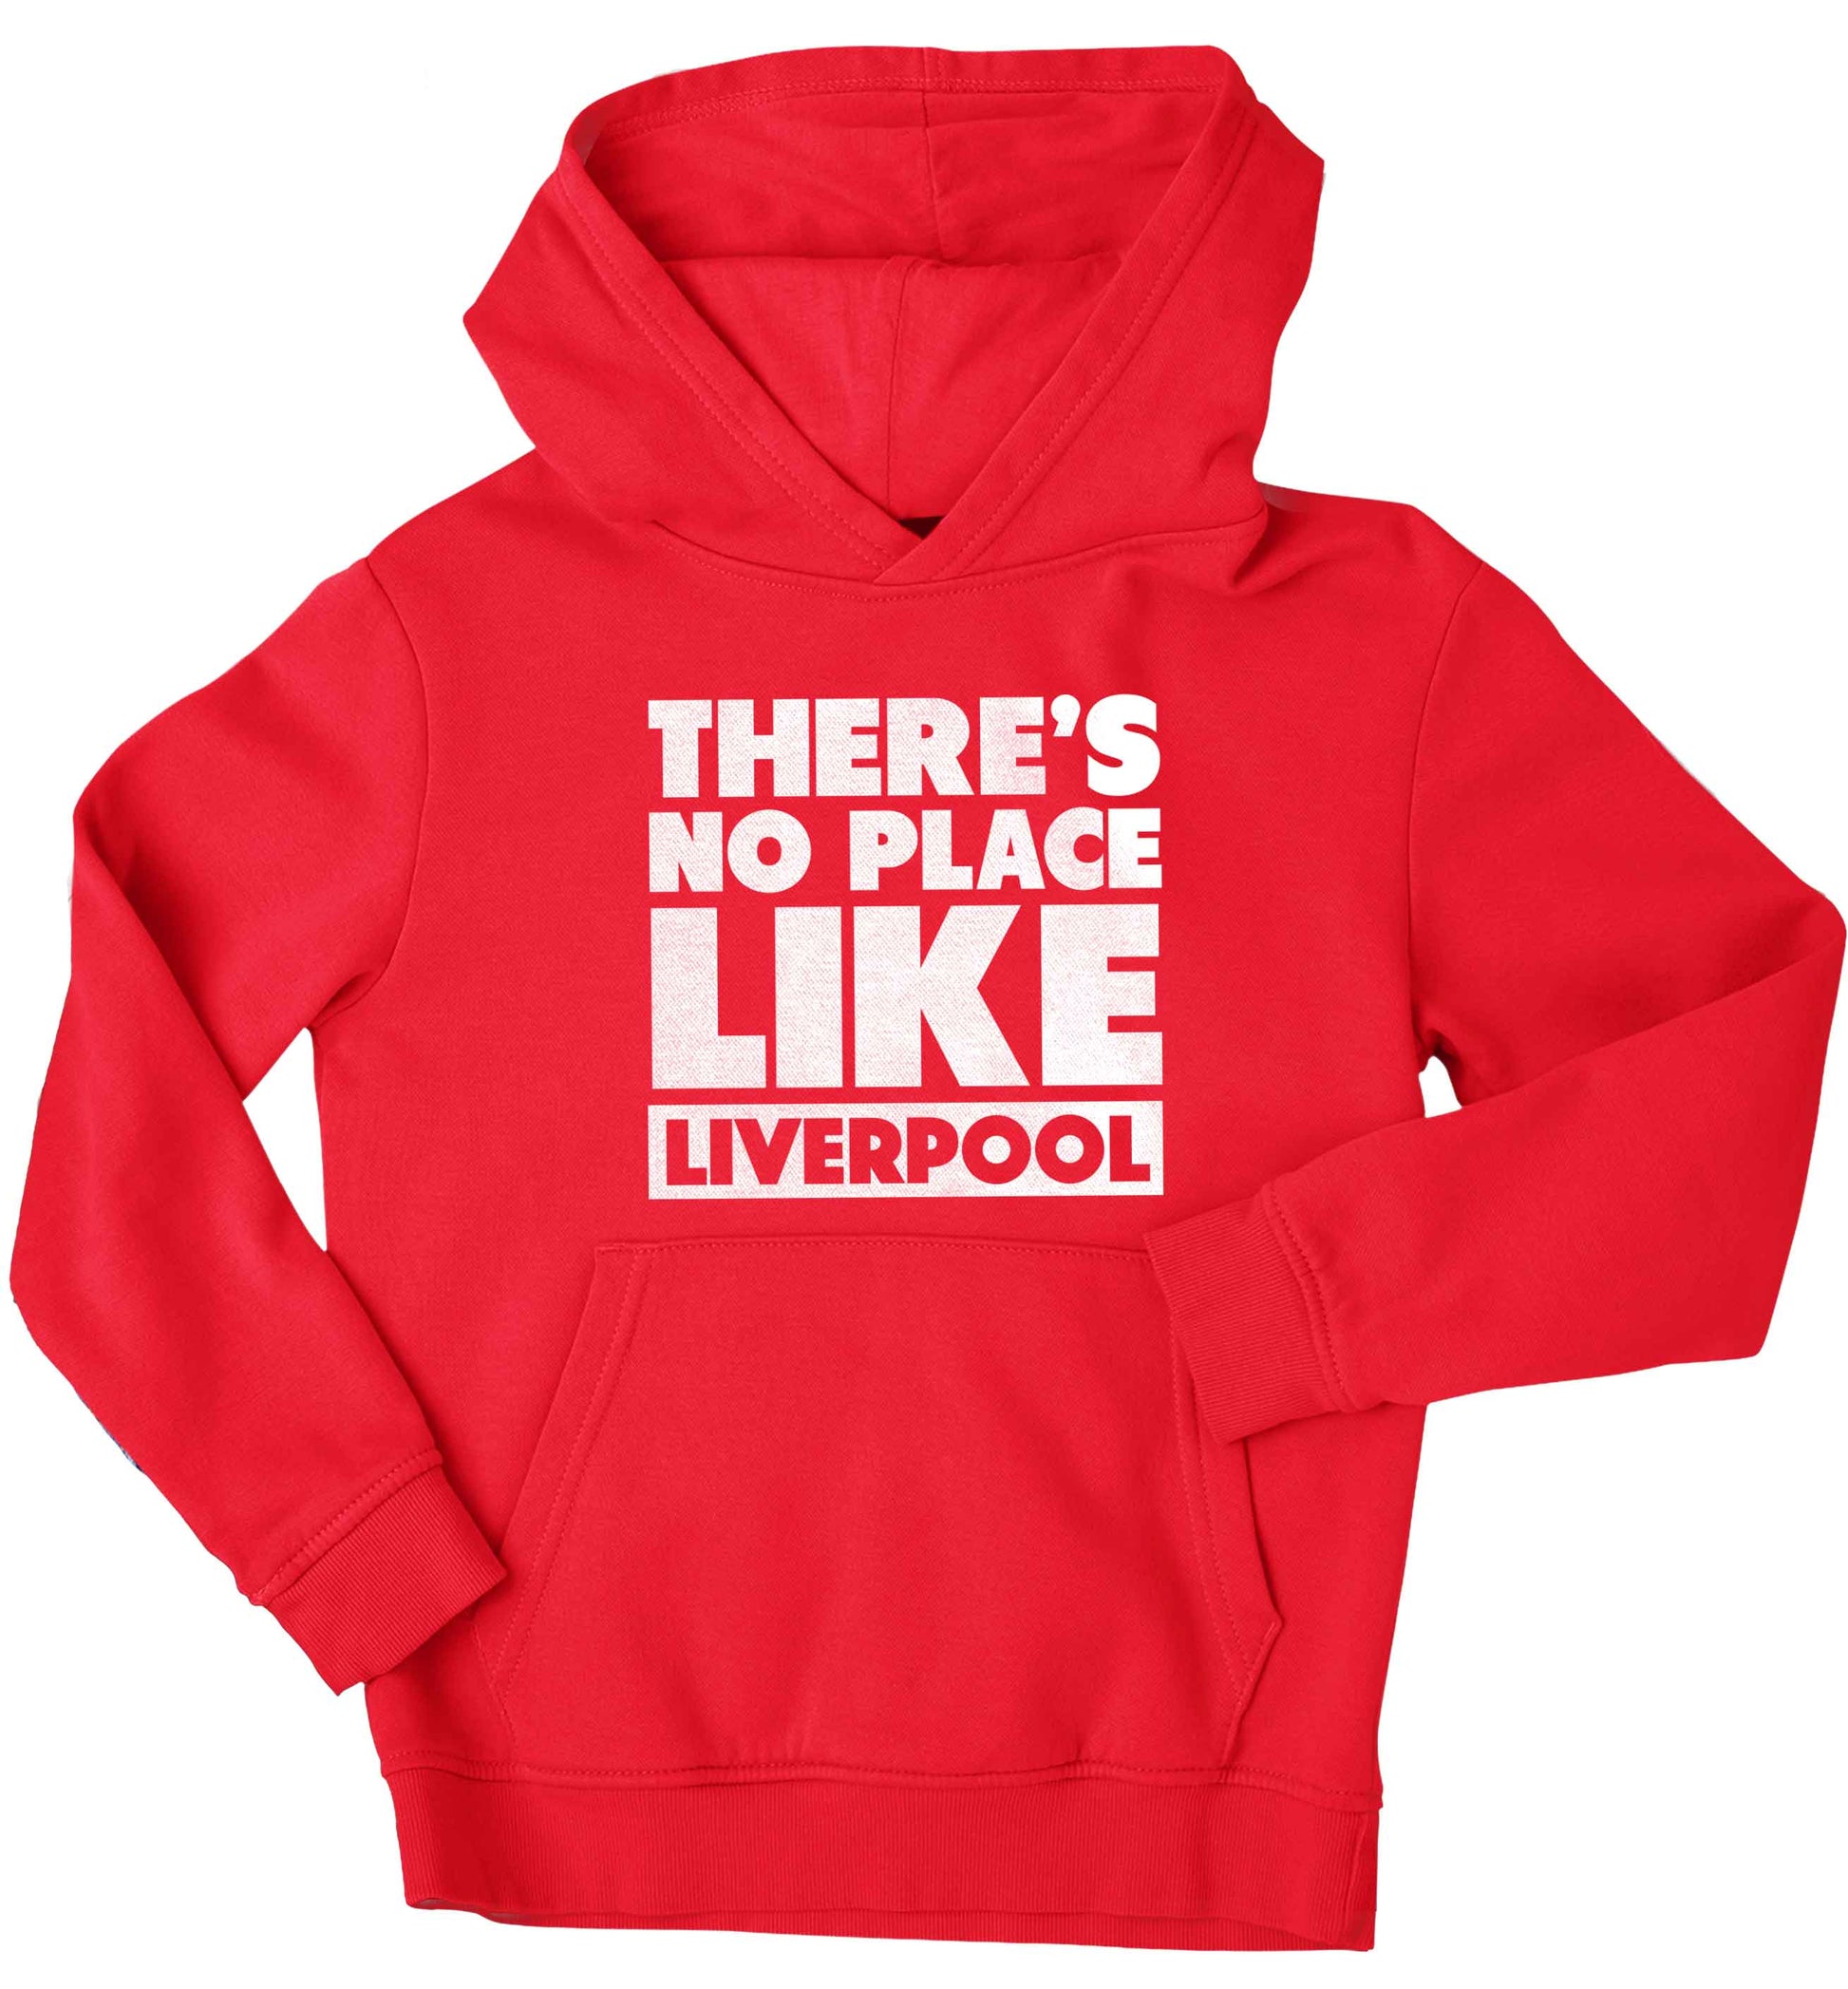 There's no place like Liverpool children's red hoodie 12-13 Years